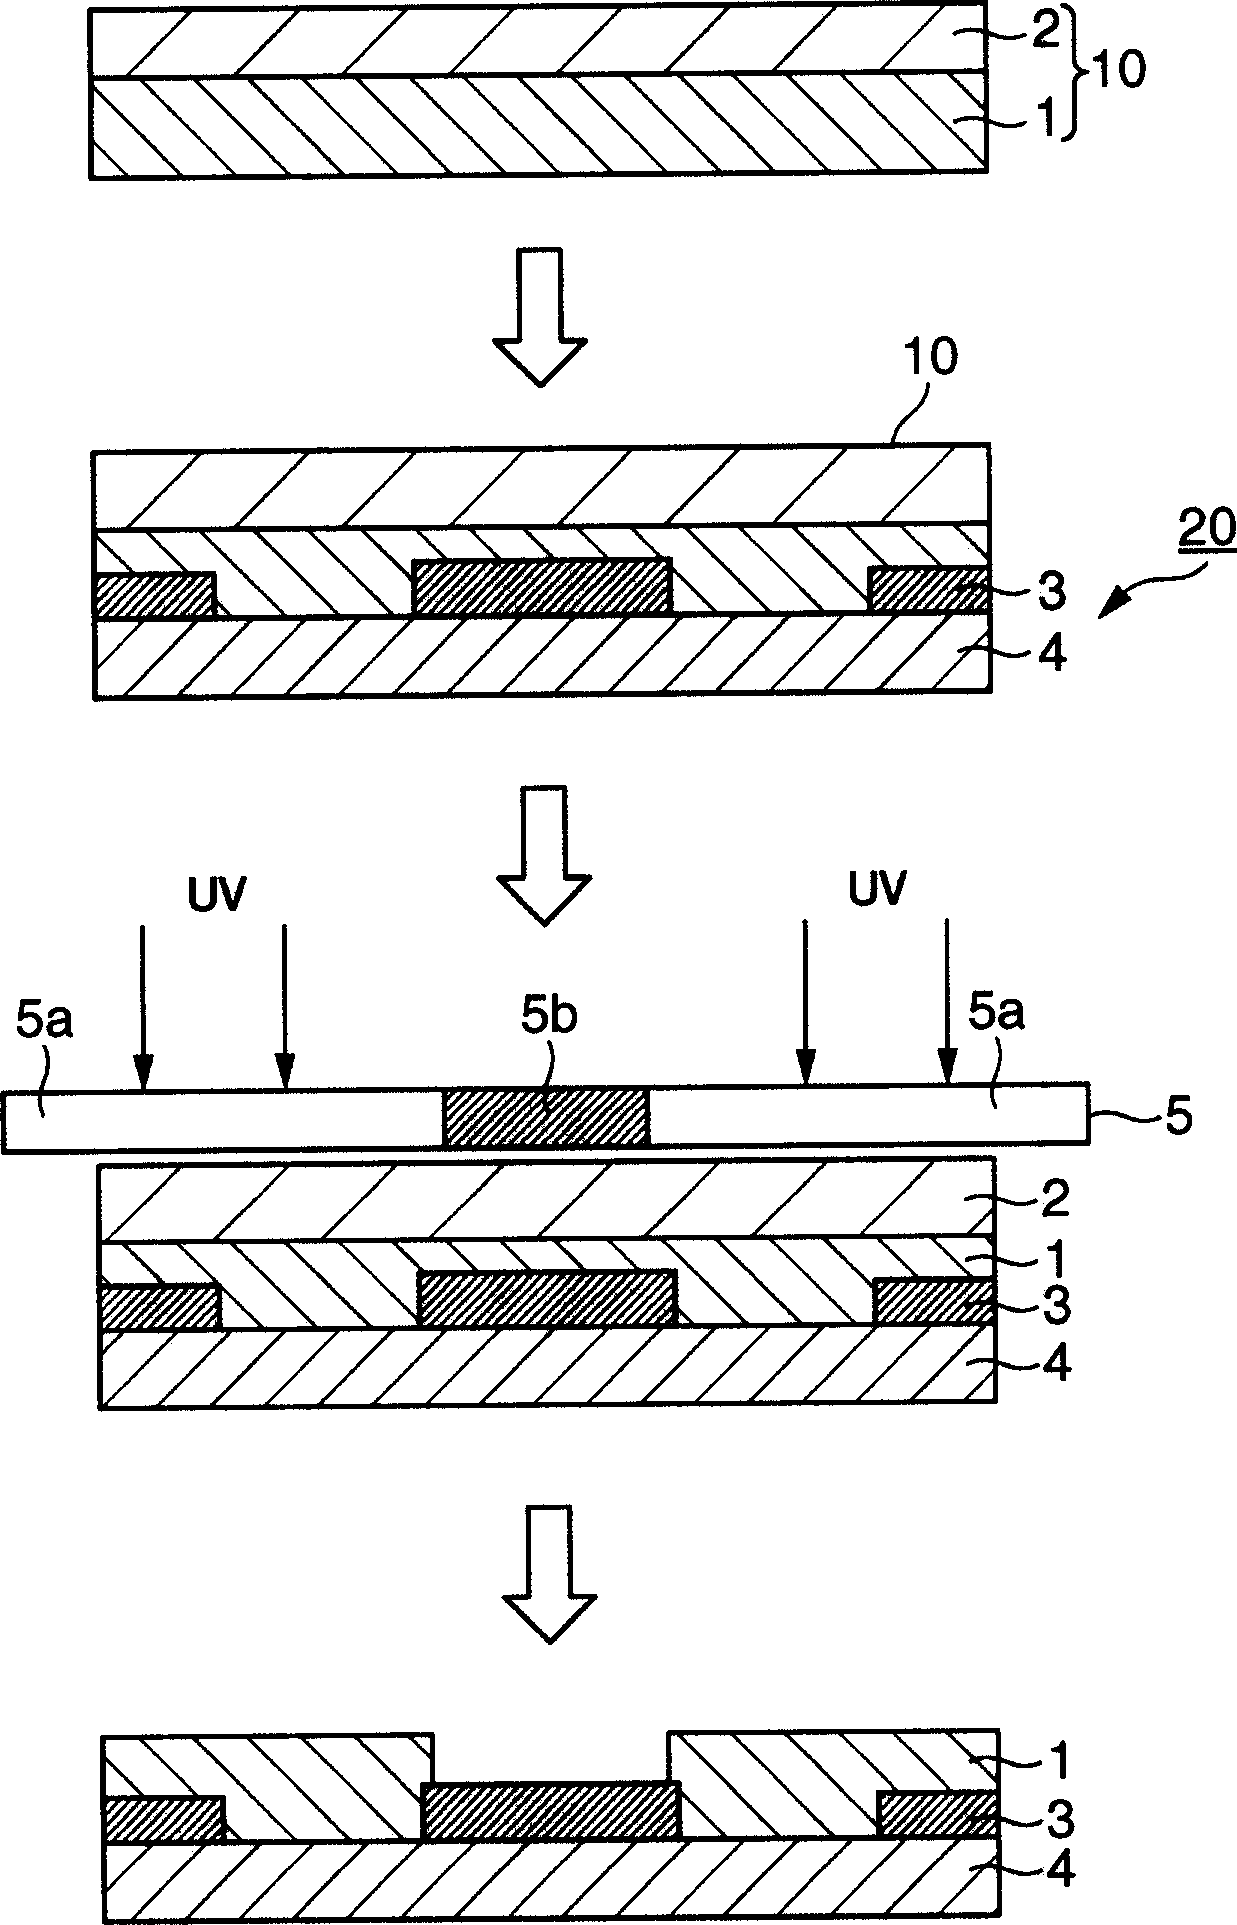 Photosensitive thermosetting resin composition, and photosensitive cover lay and flexible printed wiring board using the composition